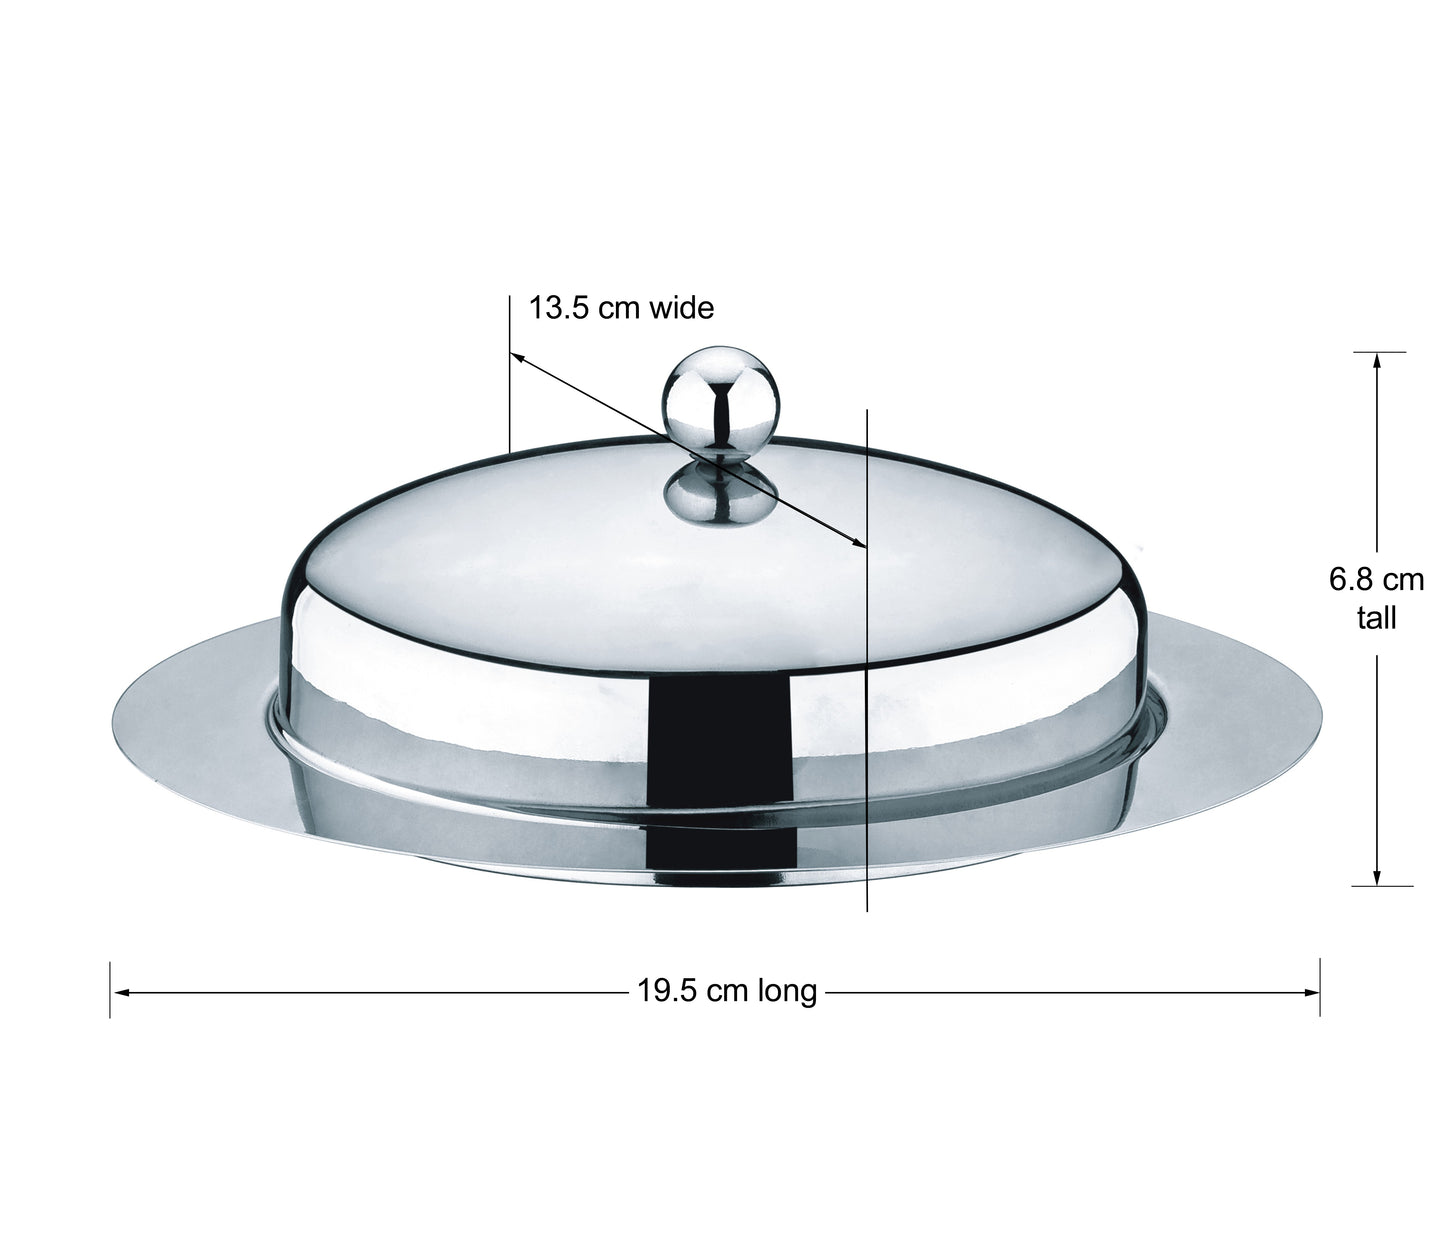 Cuisinox Stainless Steel Butter Dish